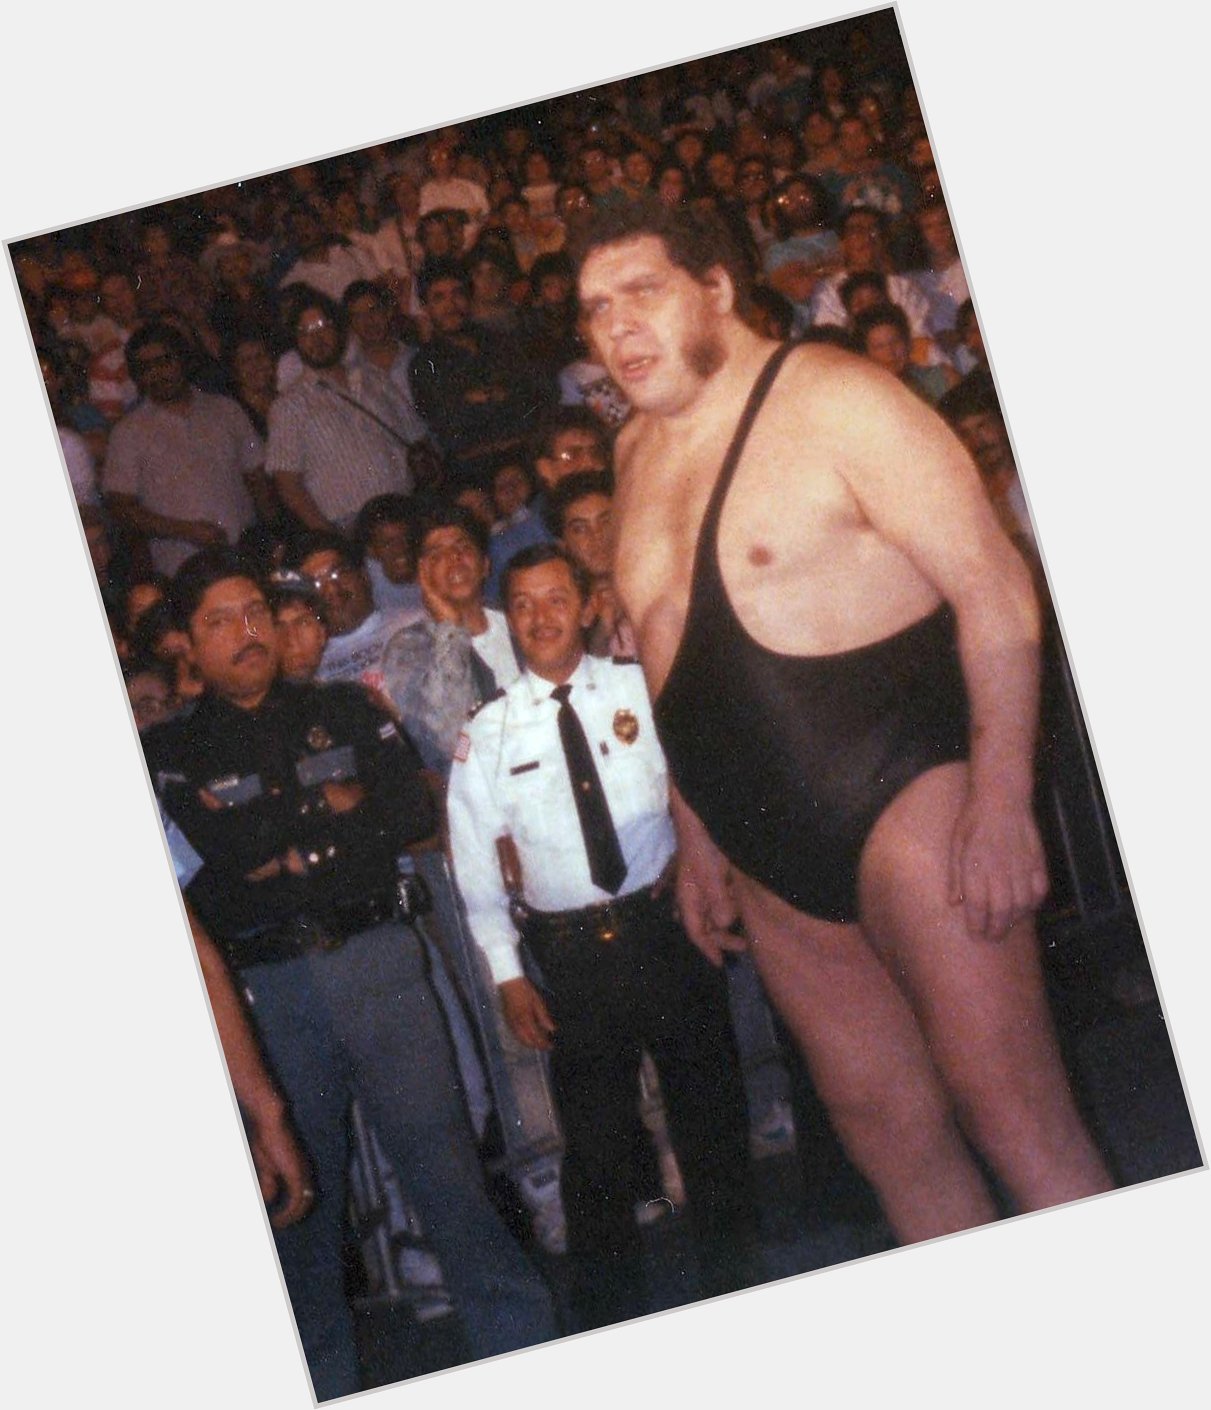 Happy Birthday to Andre the Giant, who would have turned 69 today! 